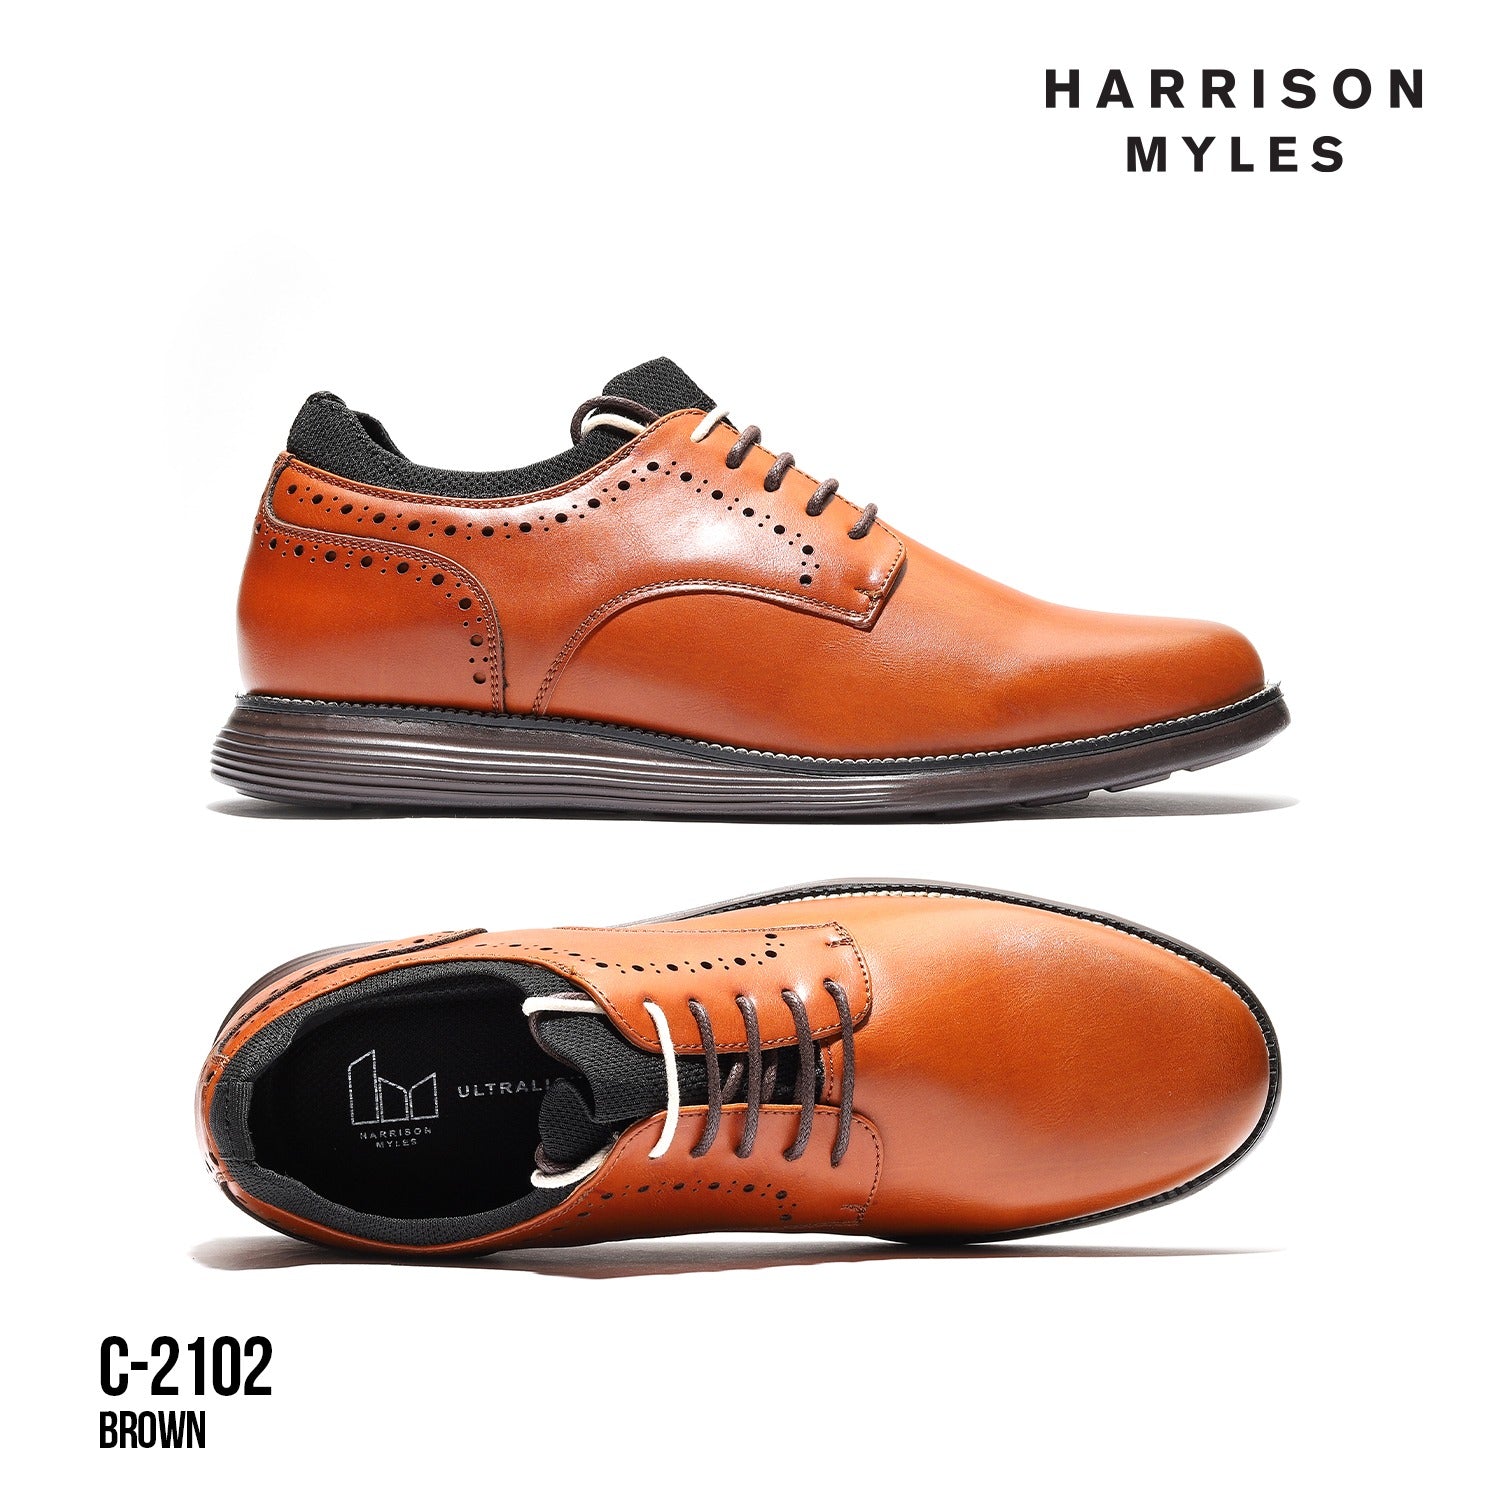 Harrison Myles Brown Lace-up